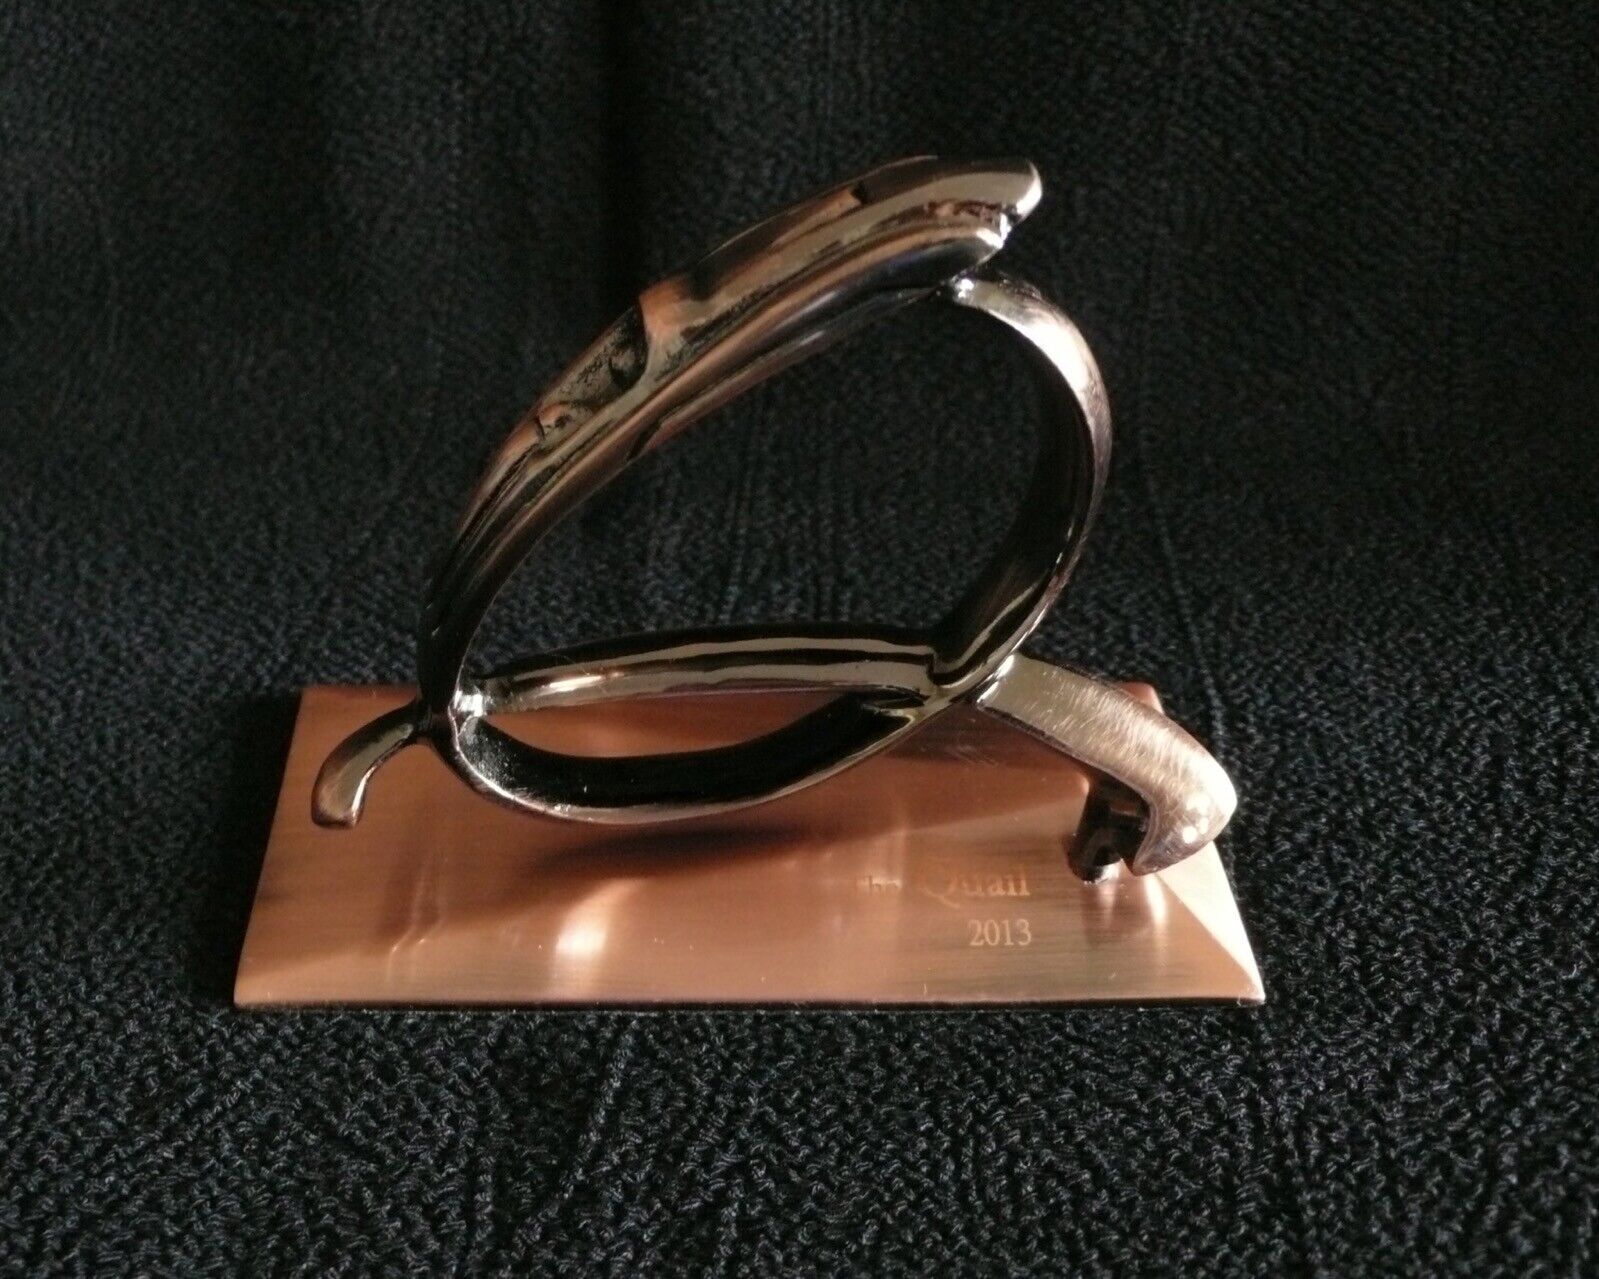 2013 The Quail Motorsports Gathering Participant Trophy FLAWLESS